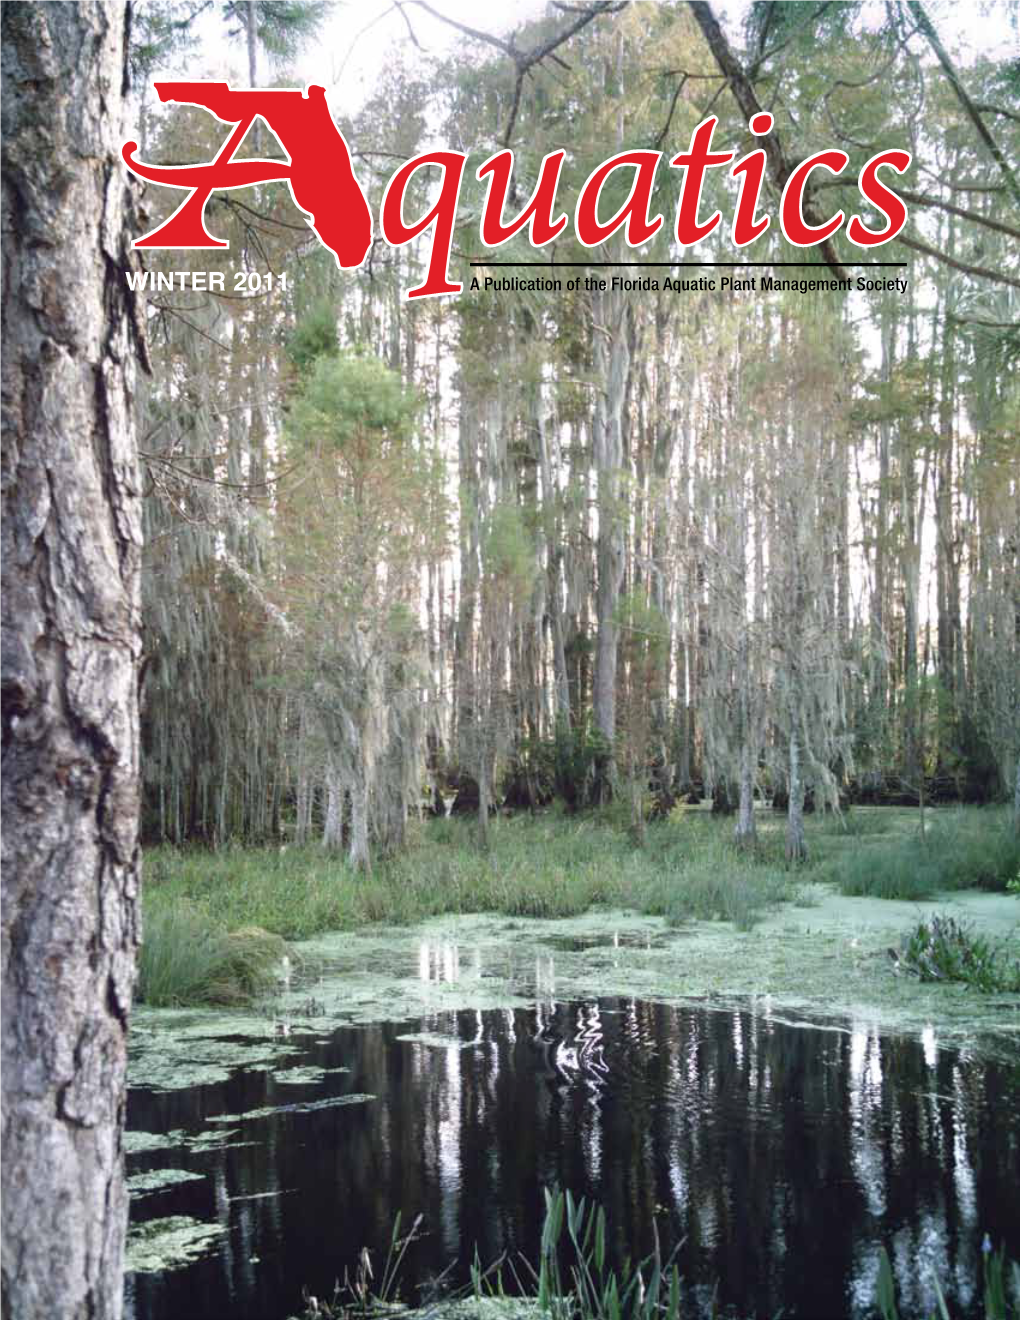 WINTER 2011 a Publication of the Florida Aquatic Plant Management Society